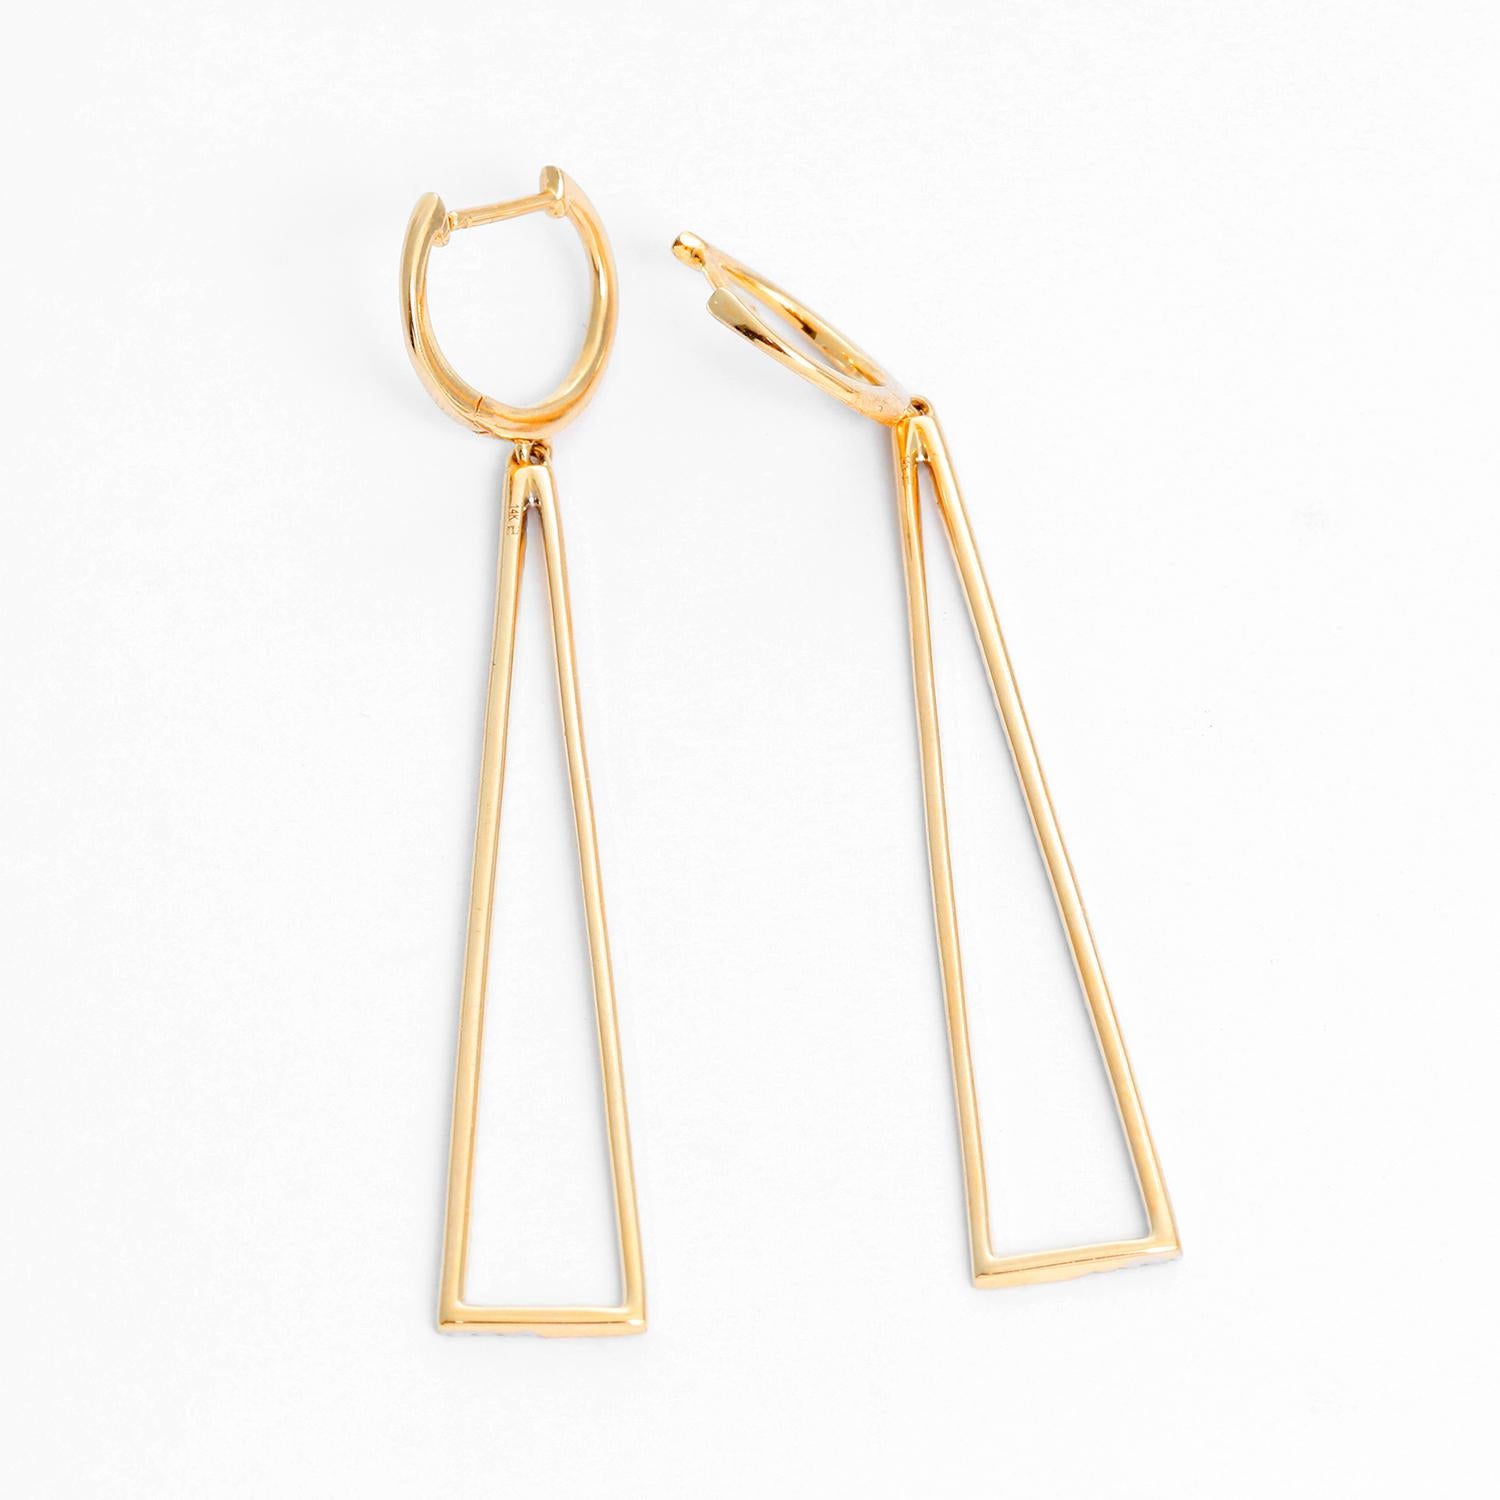 Triangular 14K Yellow Gold Diamond Earrings - Triangular shape set with 0.33ct diamond or a cushion shape set with 0.32ct diamond. Created in cool 14K yellow gold.  Total length 2 inches. Total weight 3.8 grams.